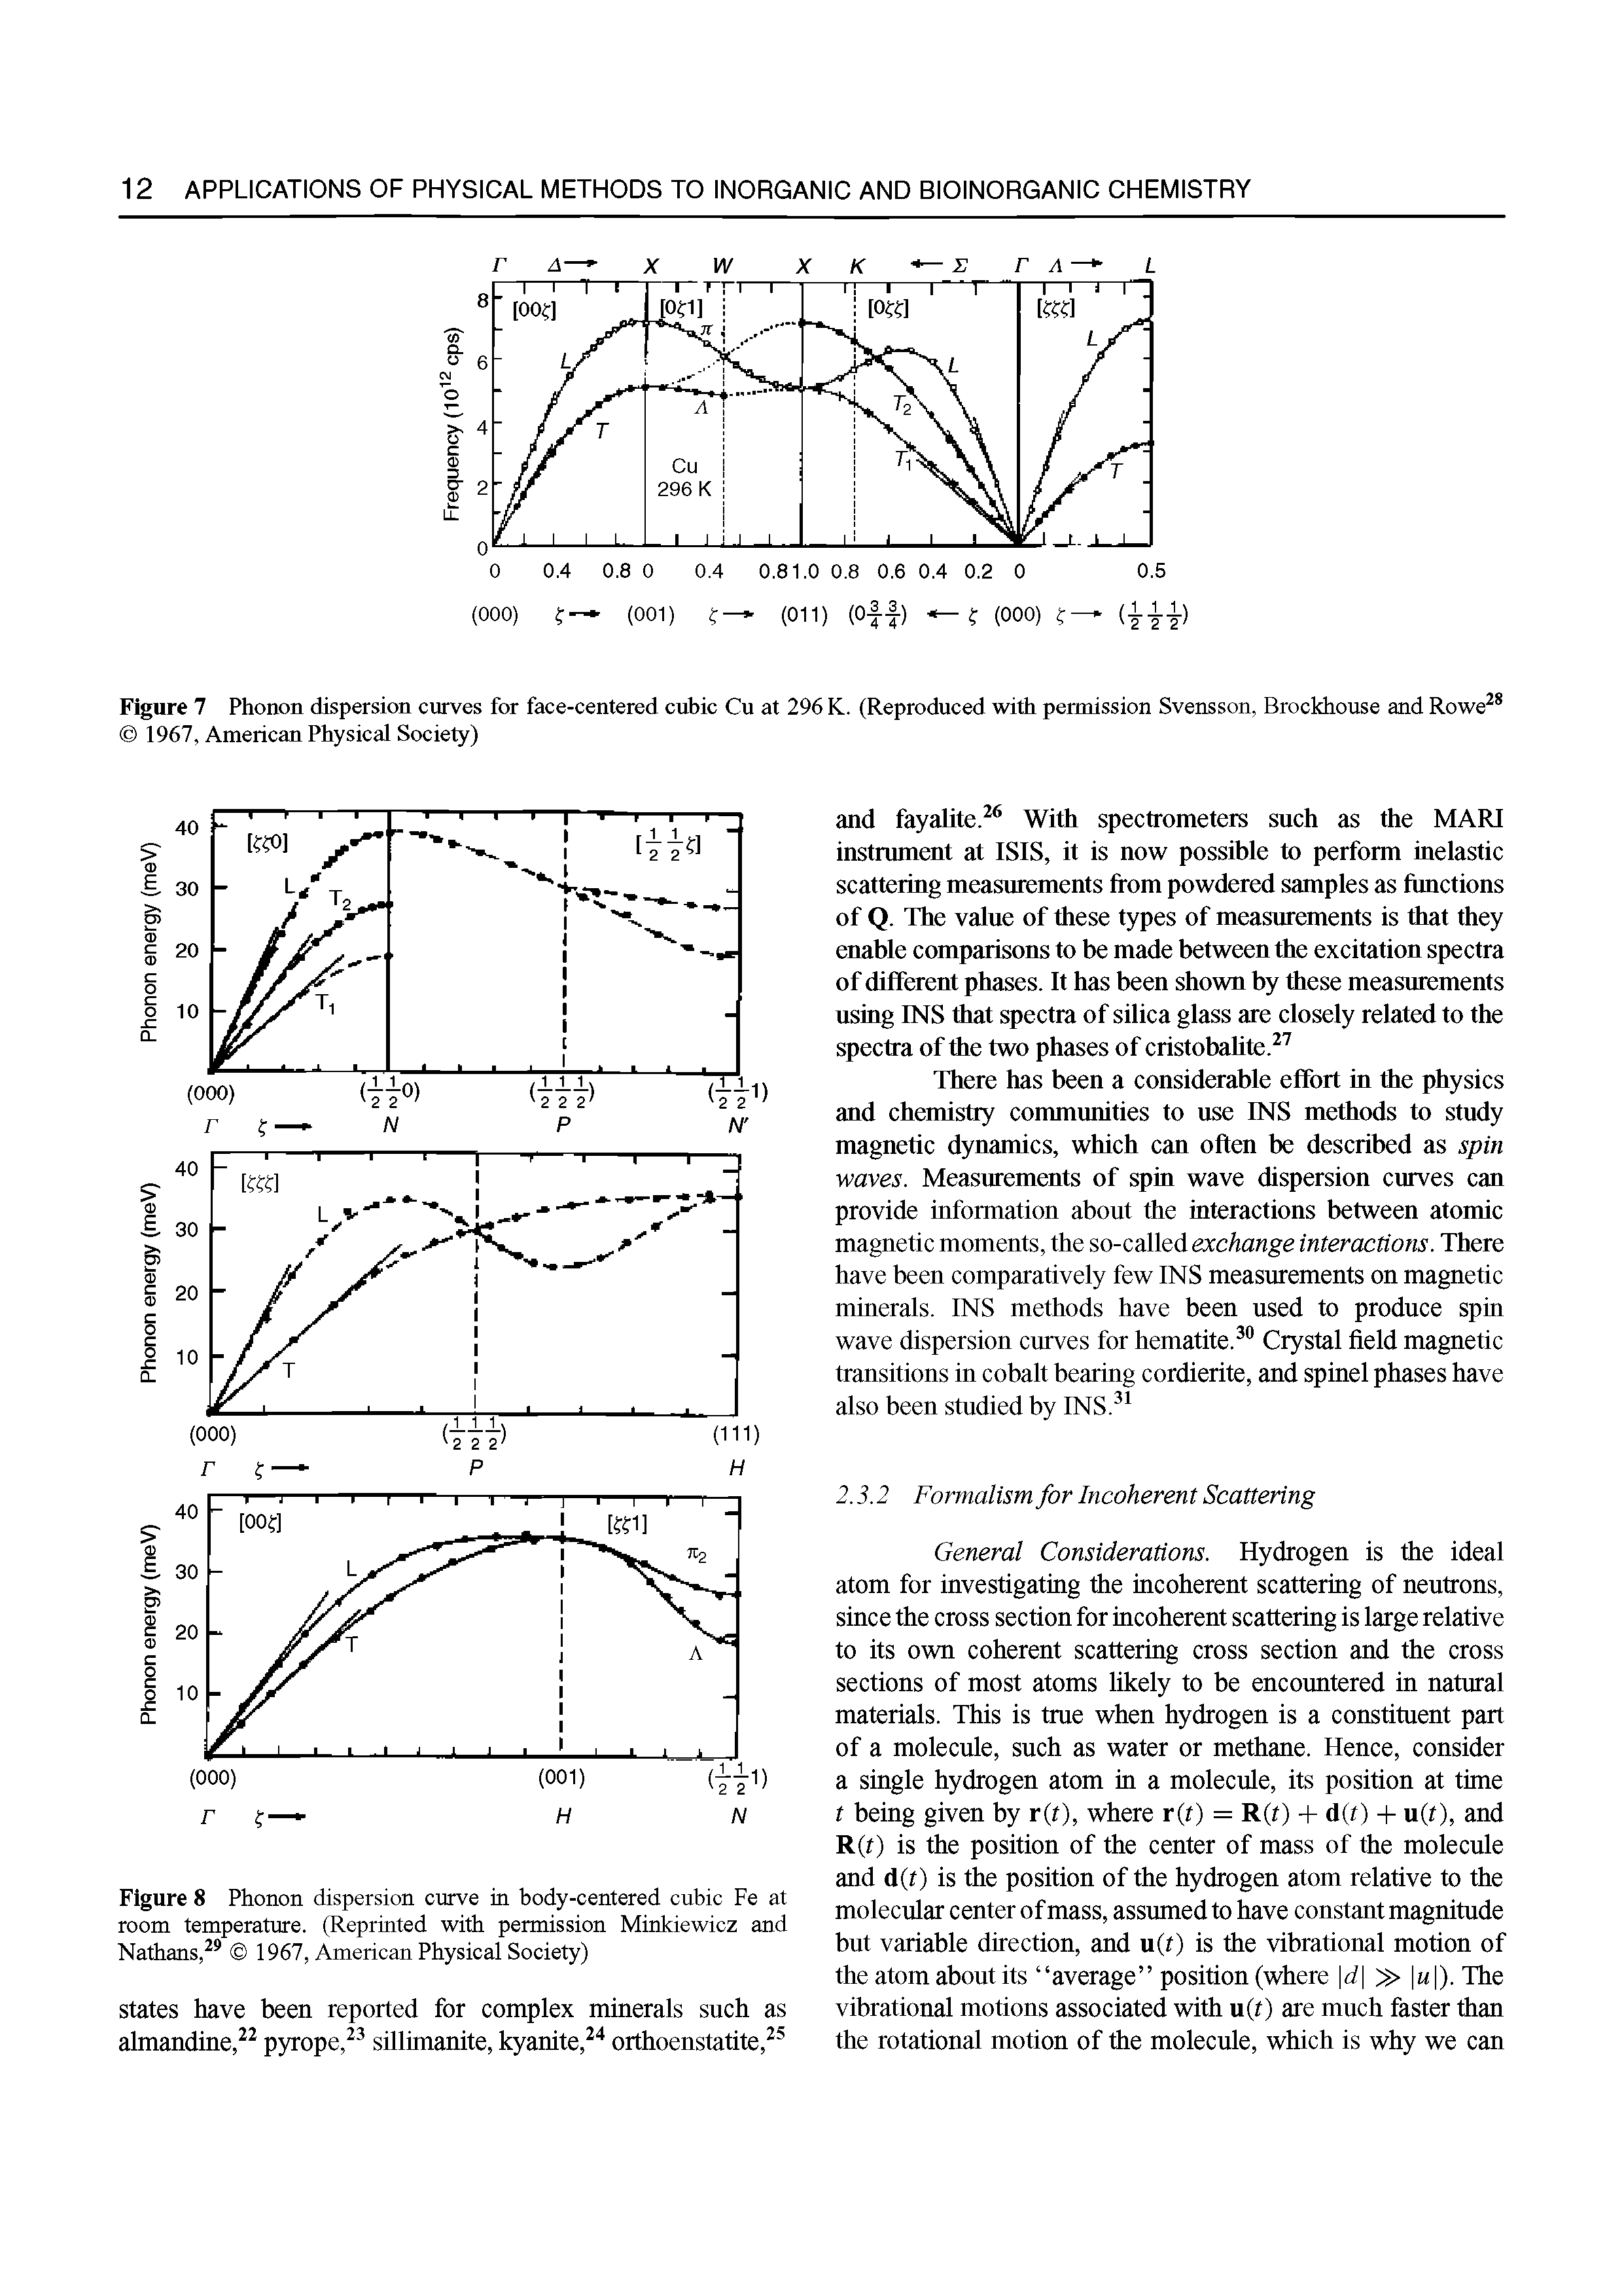 Figure 7 Phonon dispersion curves for face-centered cubic Cu at 296 K. (Reproduced with permission Svensson, Brockhouse and Rowe 1967, American Physical Society)...